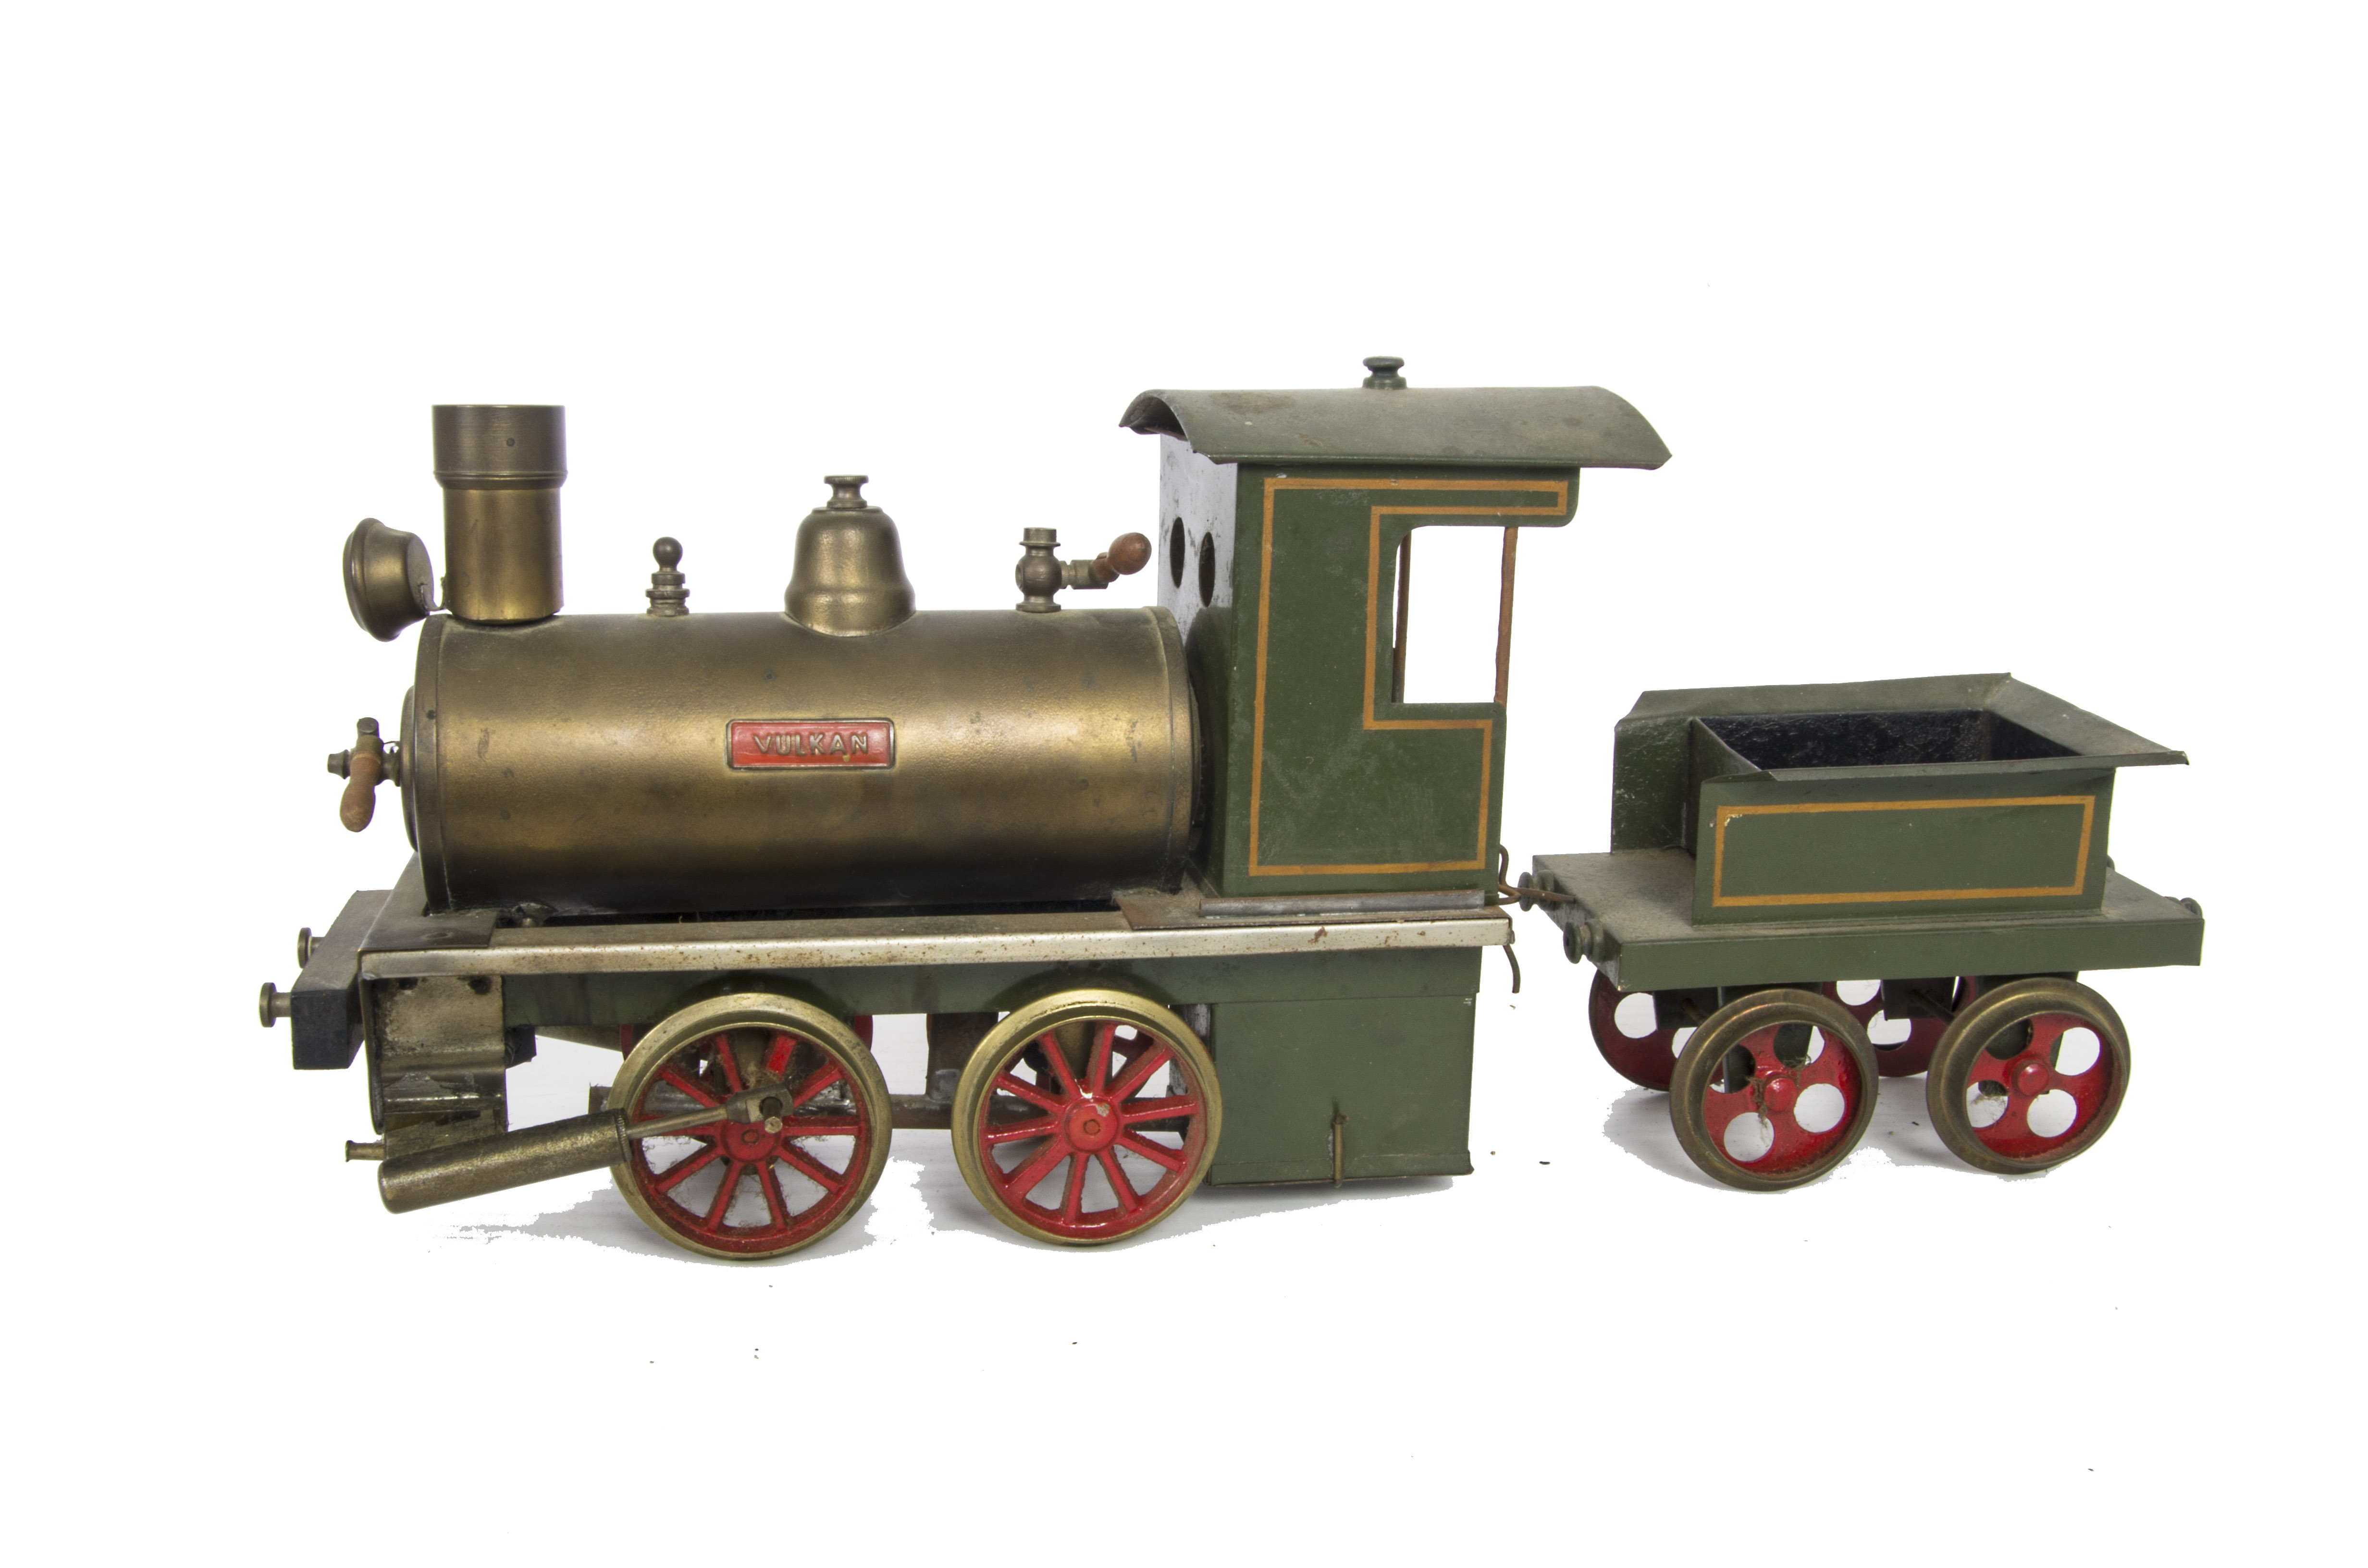 A Gauge 3 Spirit-fired ‘Vulkan’ 0-2-2 Steam Locomotive and Tender by Ernst Plank, with twin